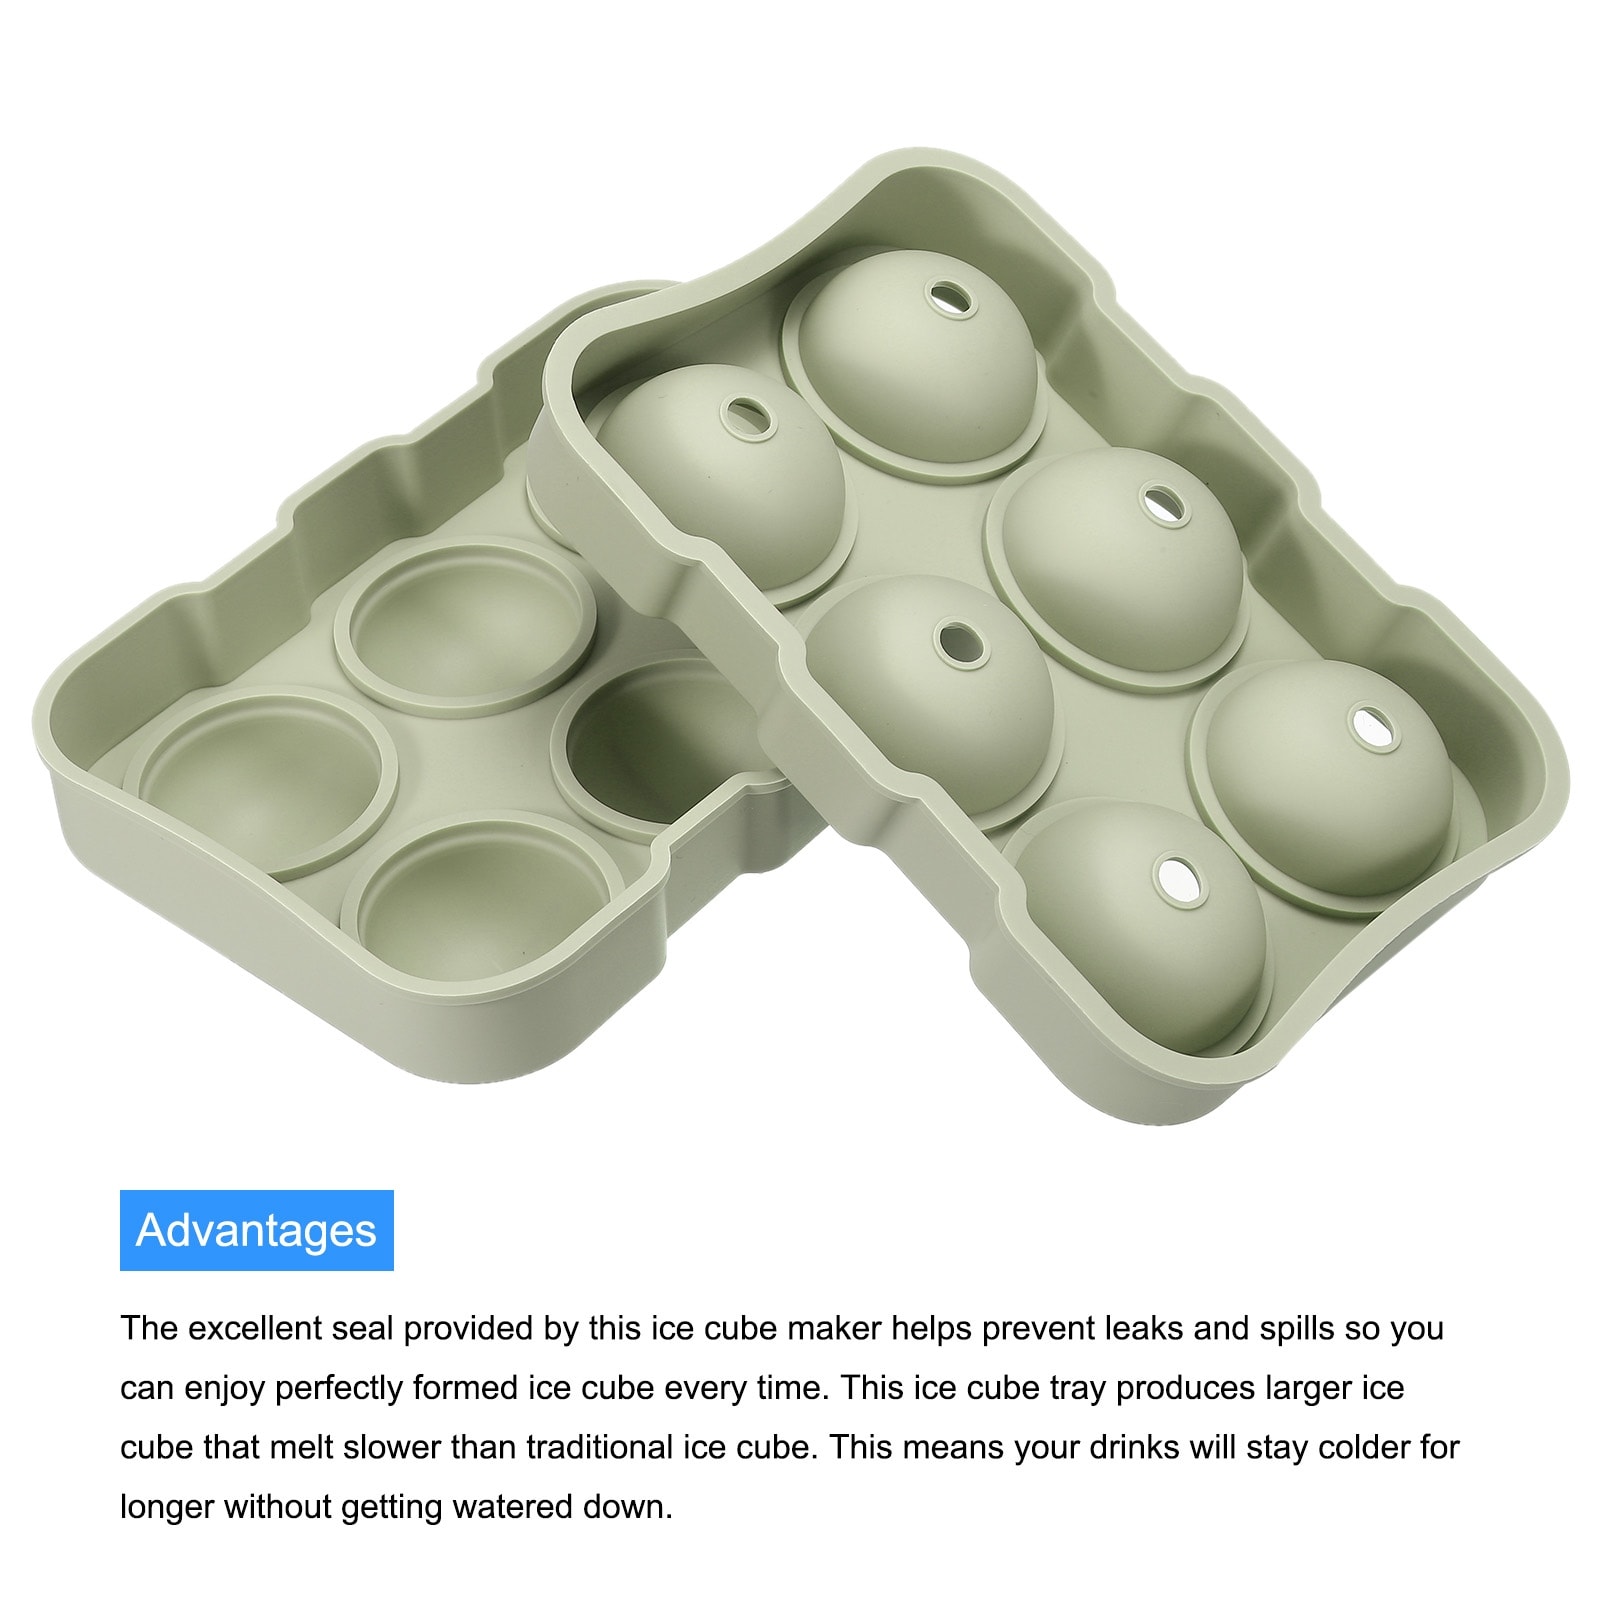 Unique Bargains 6x2 inch Ice Ball Maker,Set of 2 Round Ice Tray for Cocktails(Green,Blue) - Green,Blue